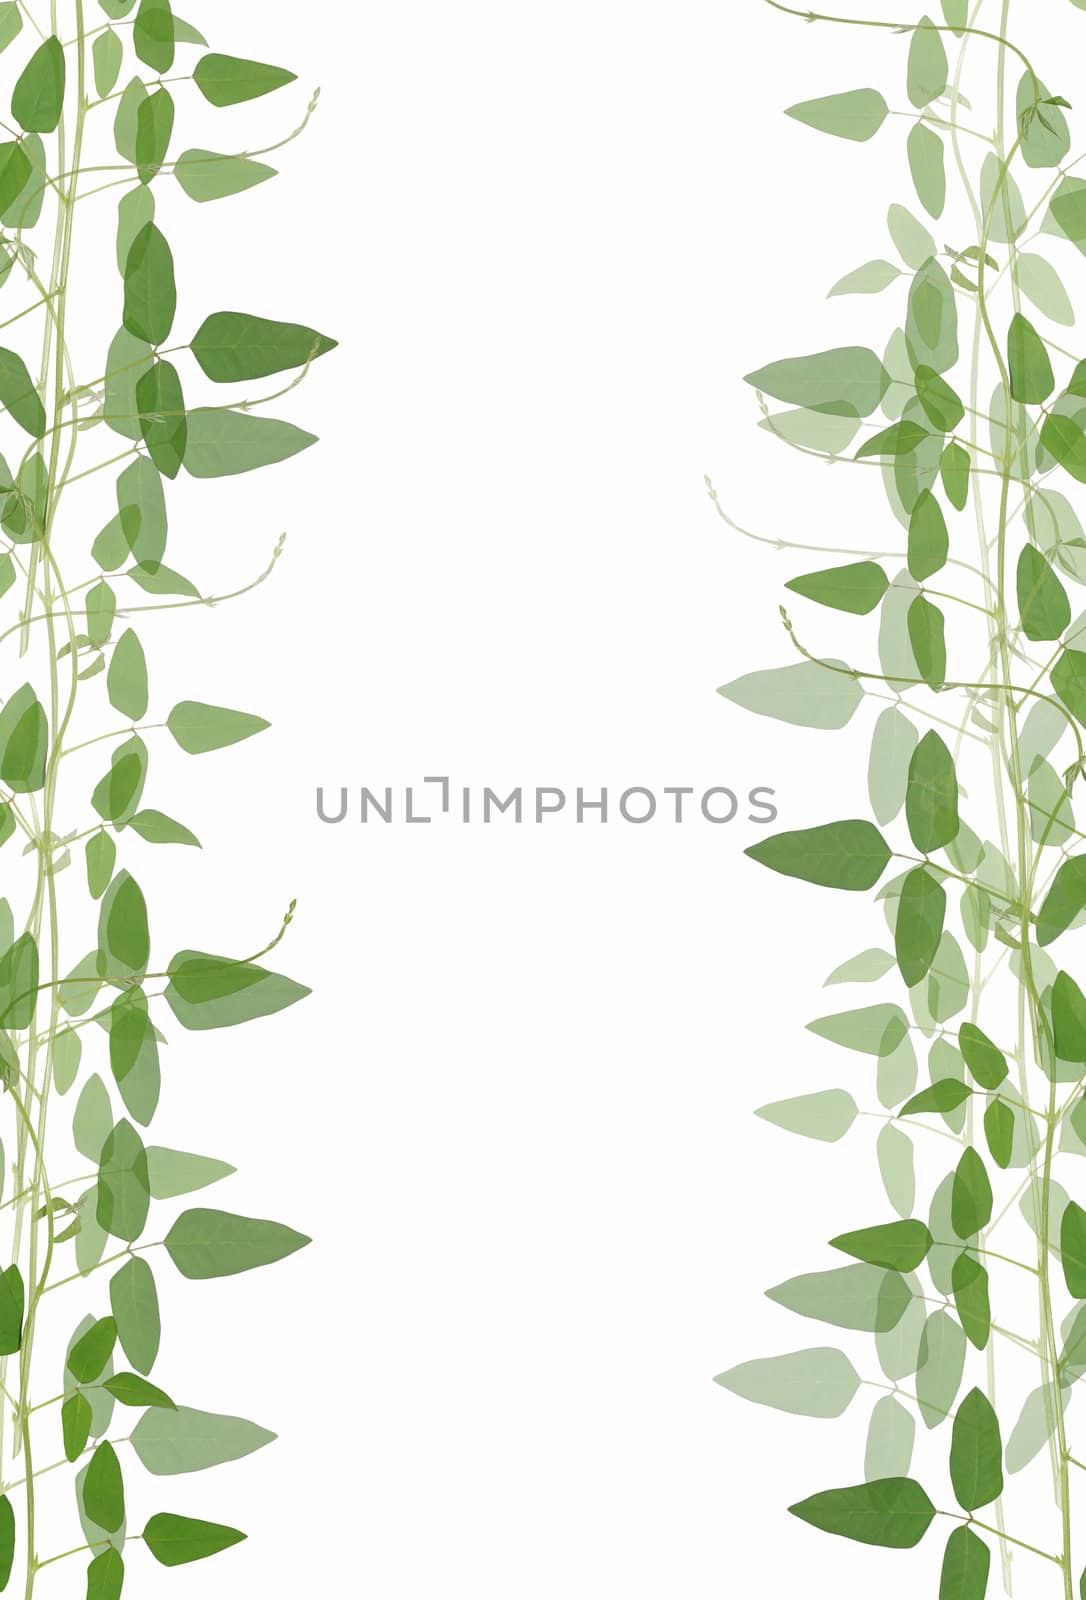 Border of green leaves against white background with space for copy.